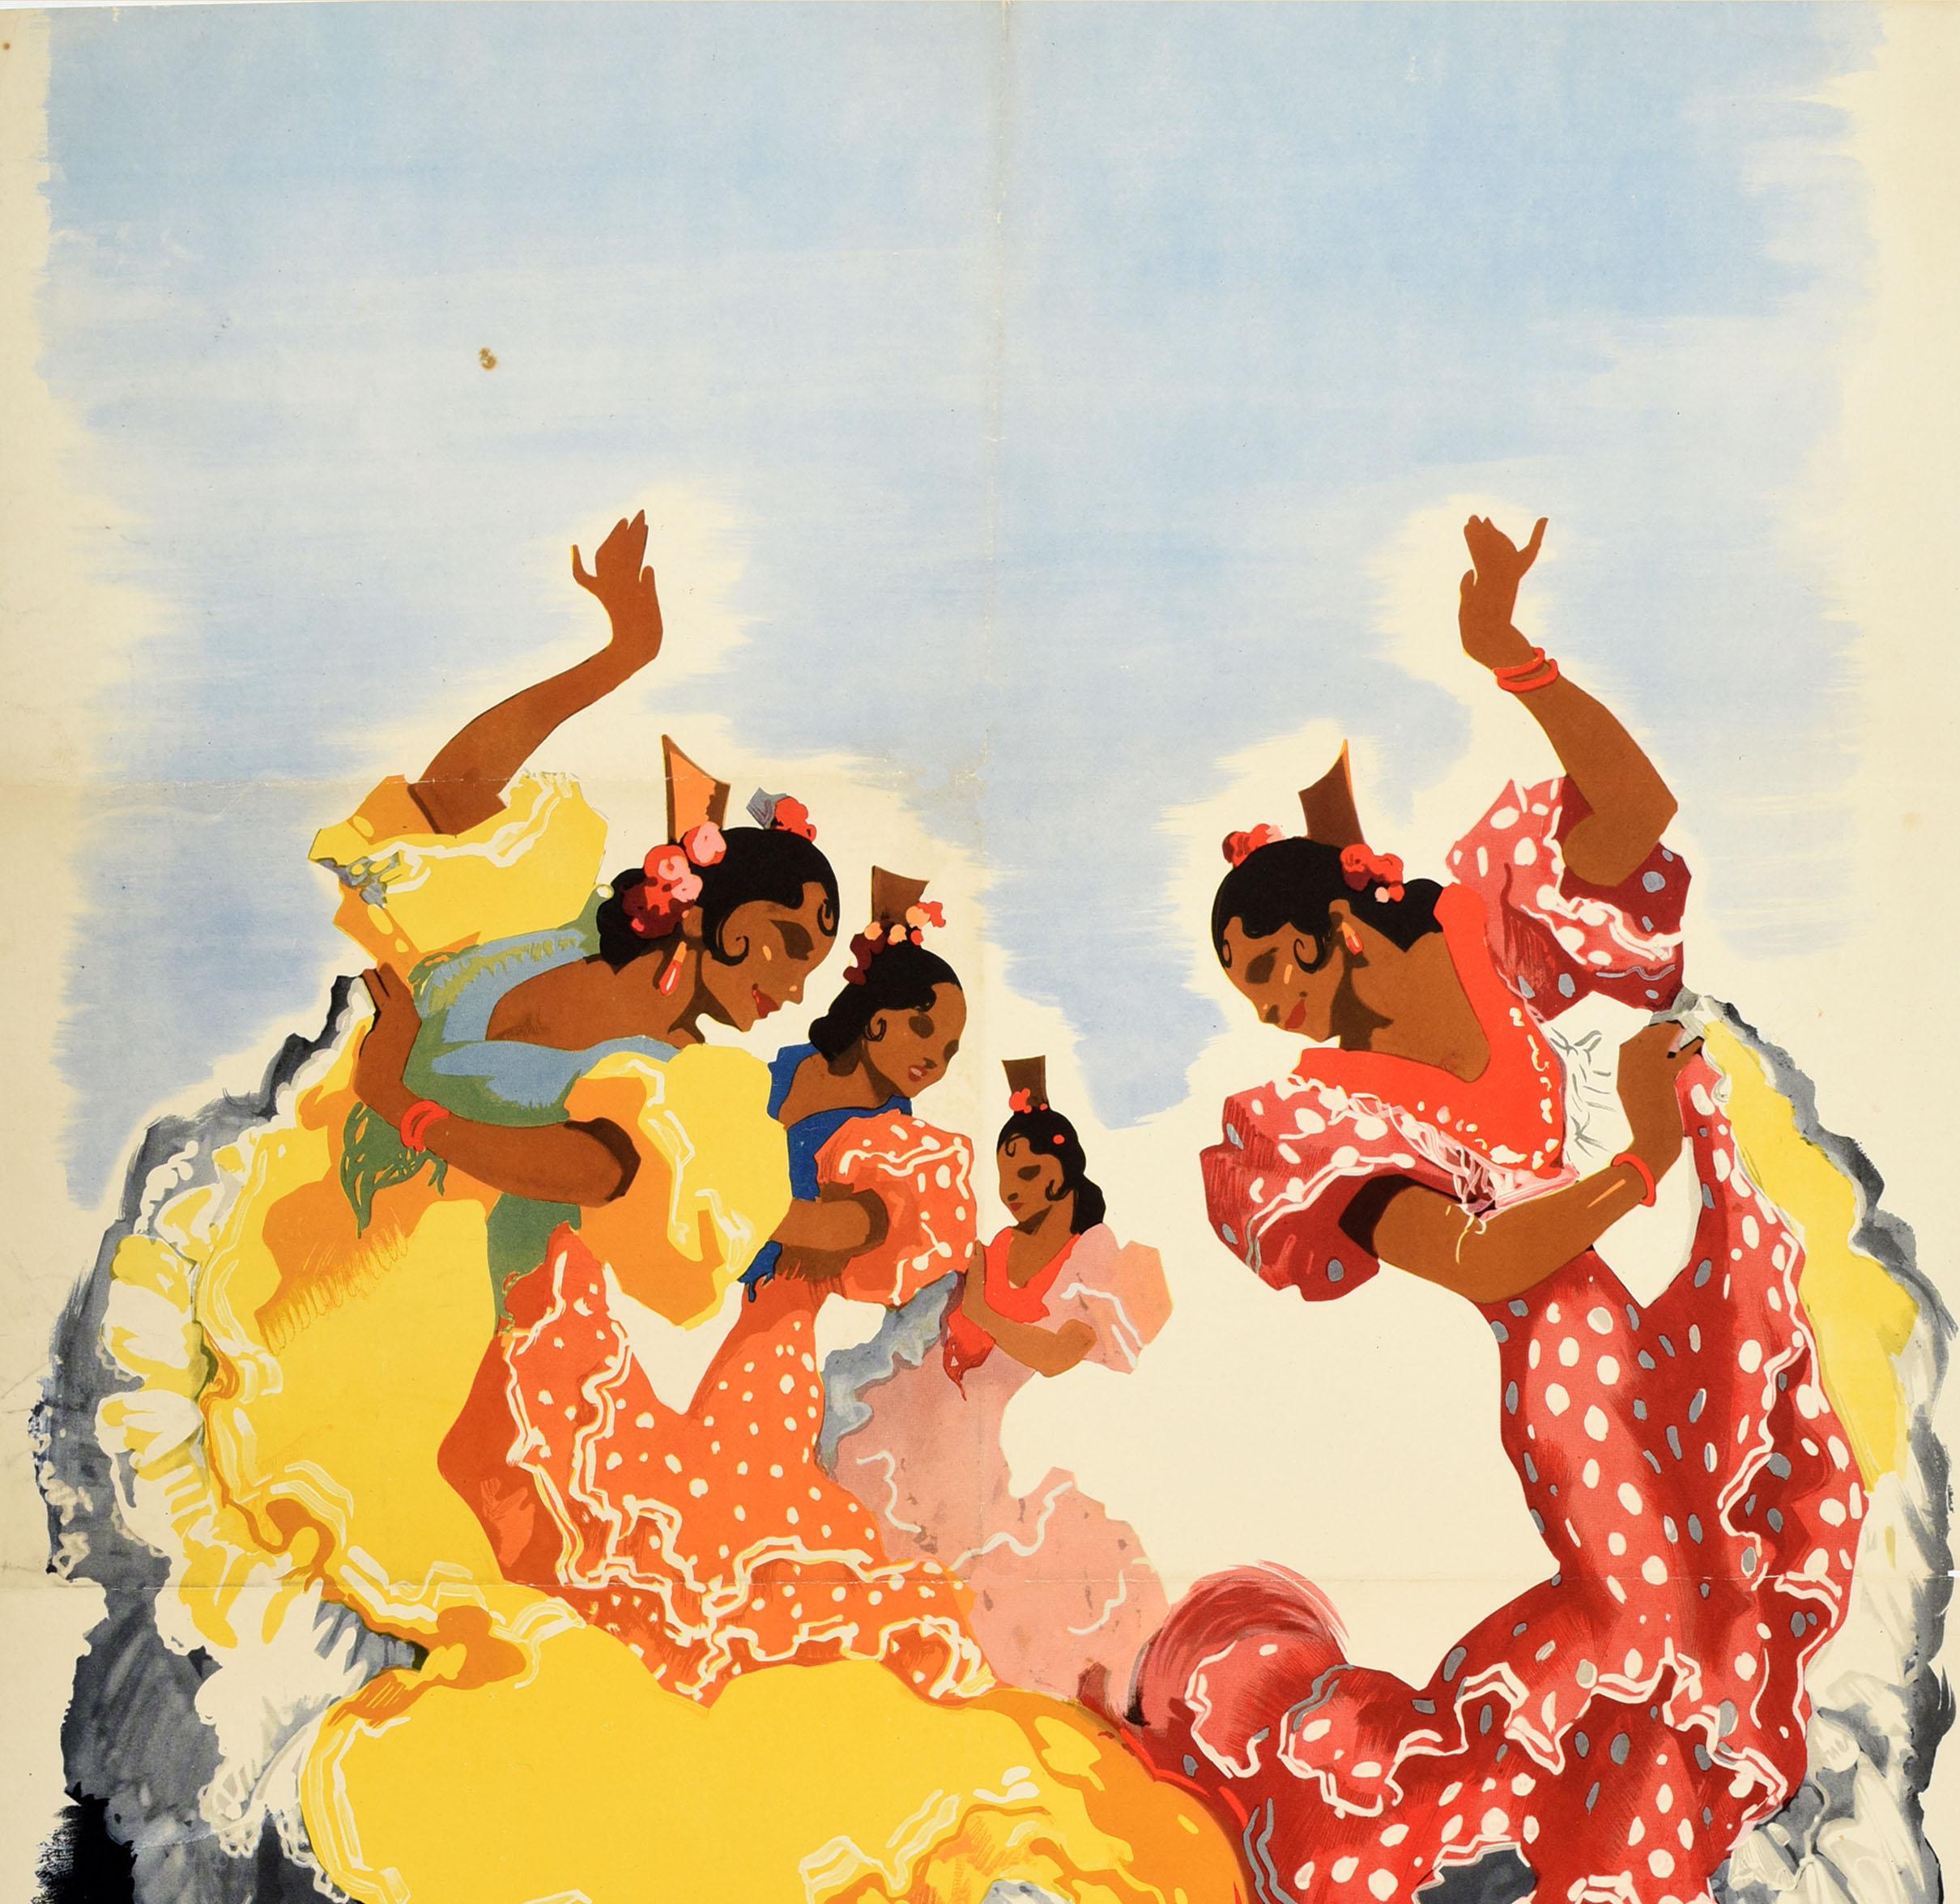 Original vintage travel poster for Spain featuring an illustration by the Spanish artist Jose Morell (1899-1949) of dancers in traditional flamenco dresses with flowers in their hair, dancing on a striped cloth with the bold text below. Published by